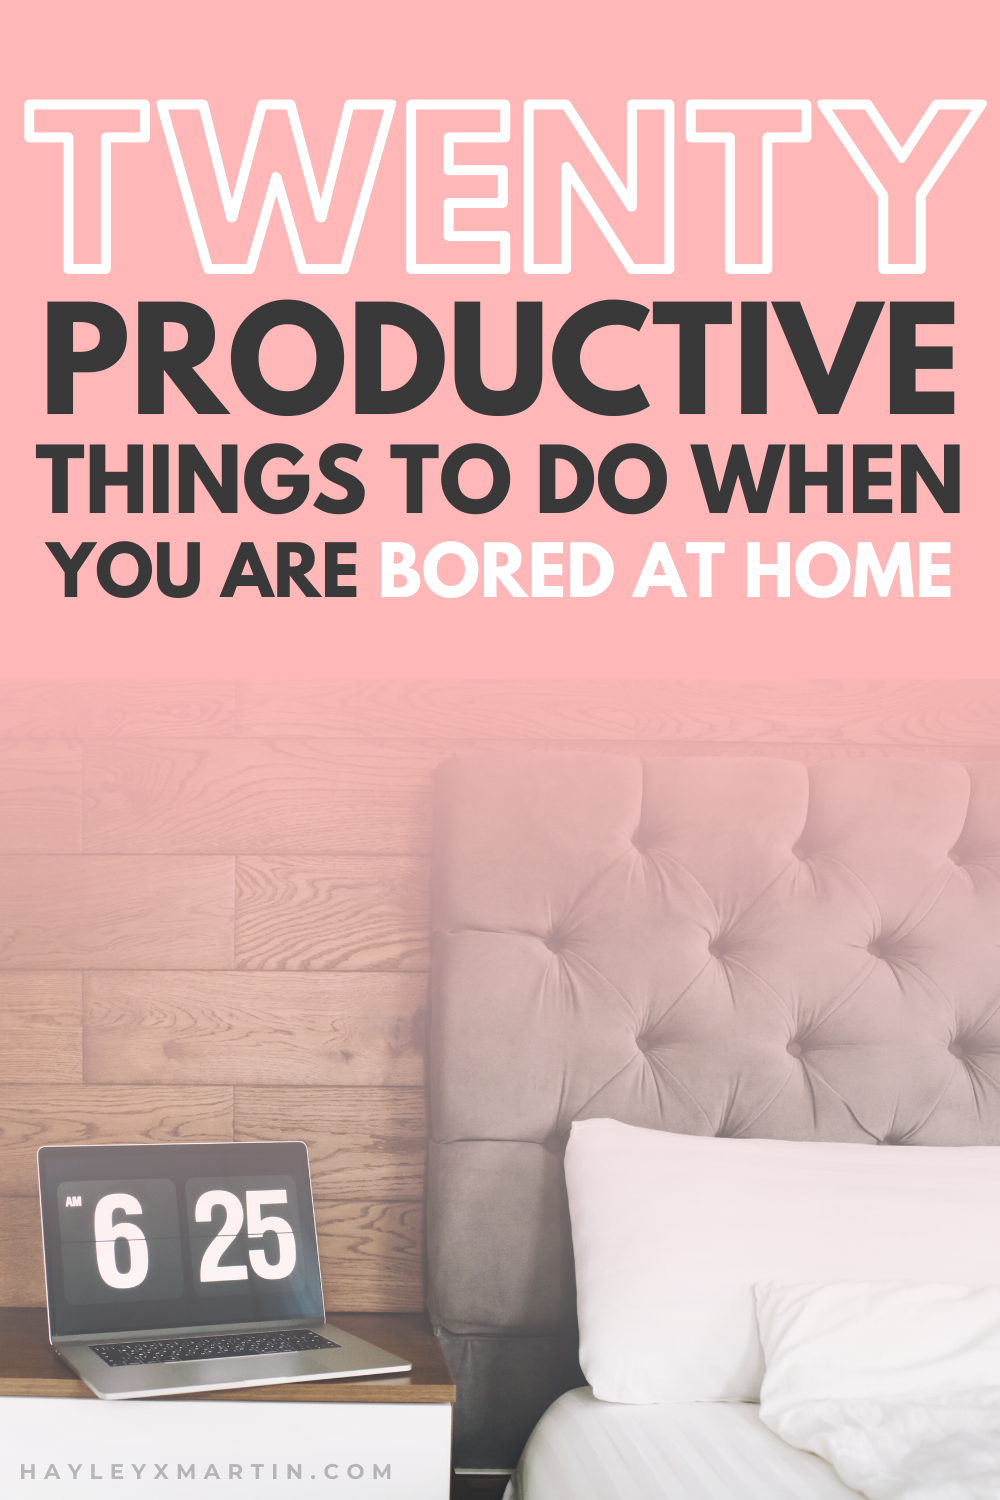 20 PRODUCTIVE THINGS TO DO WHEN YOU ARE BORED AT HOME | HAYLEYXMARTIN